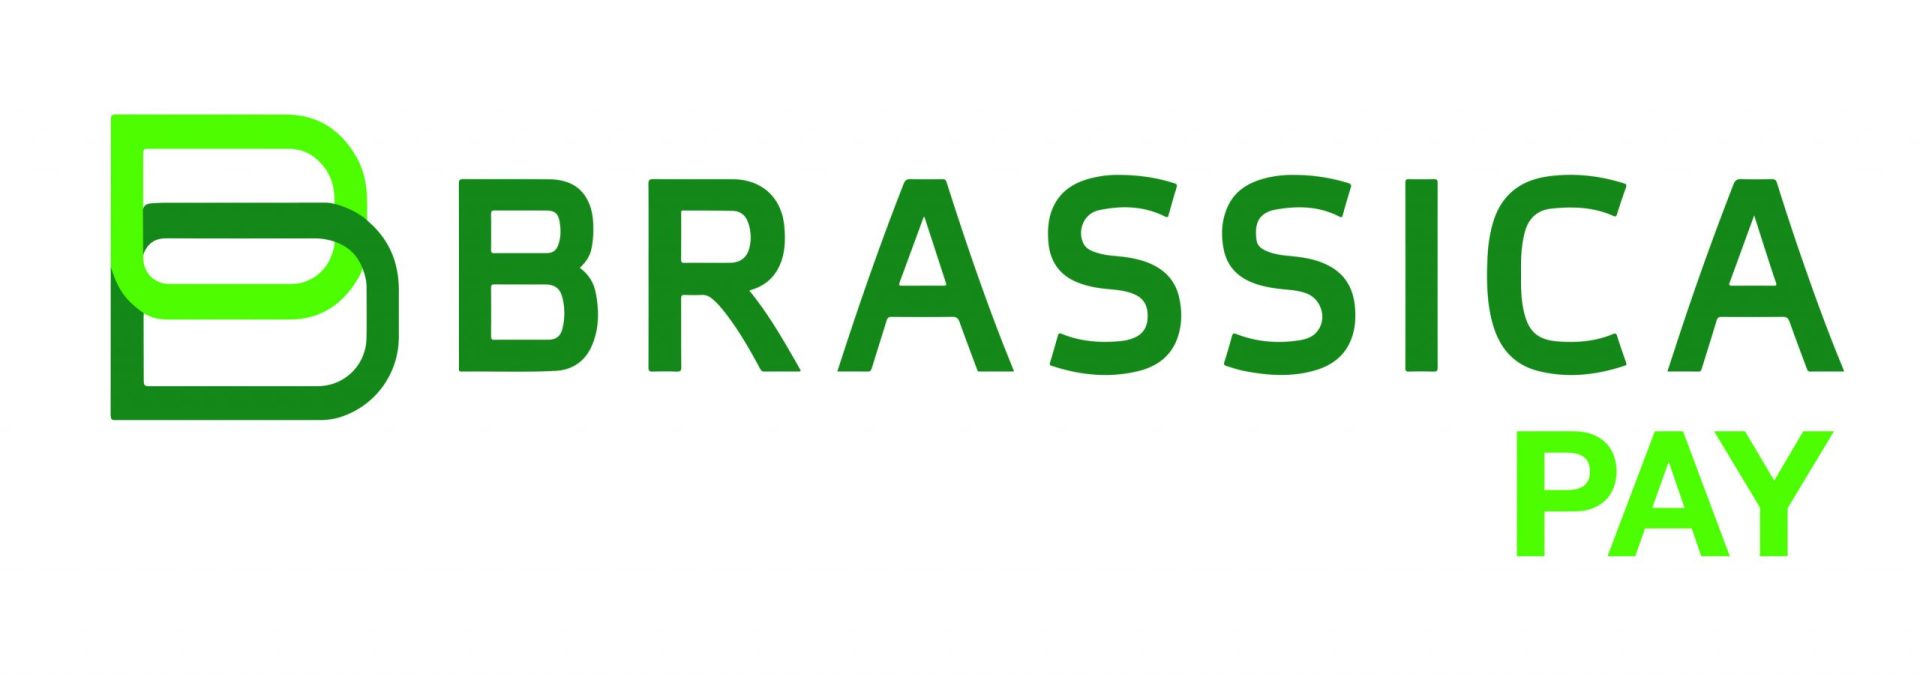 Brassica PAY logo APPROVED UPDATE 1